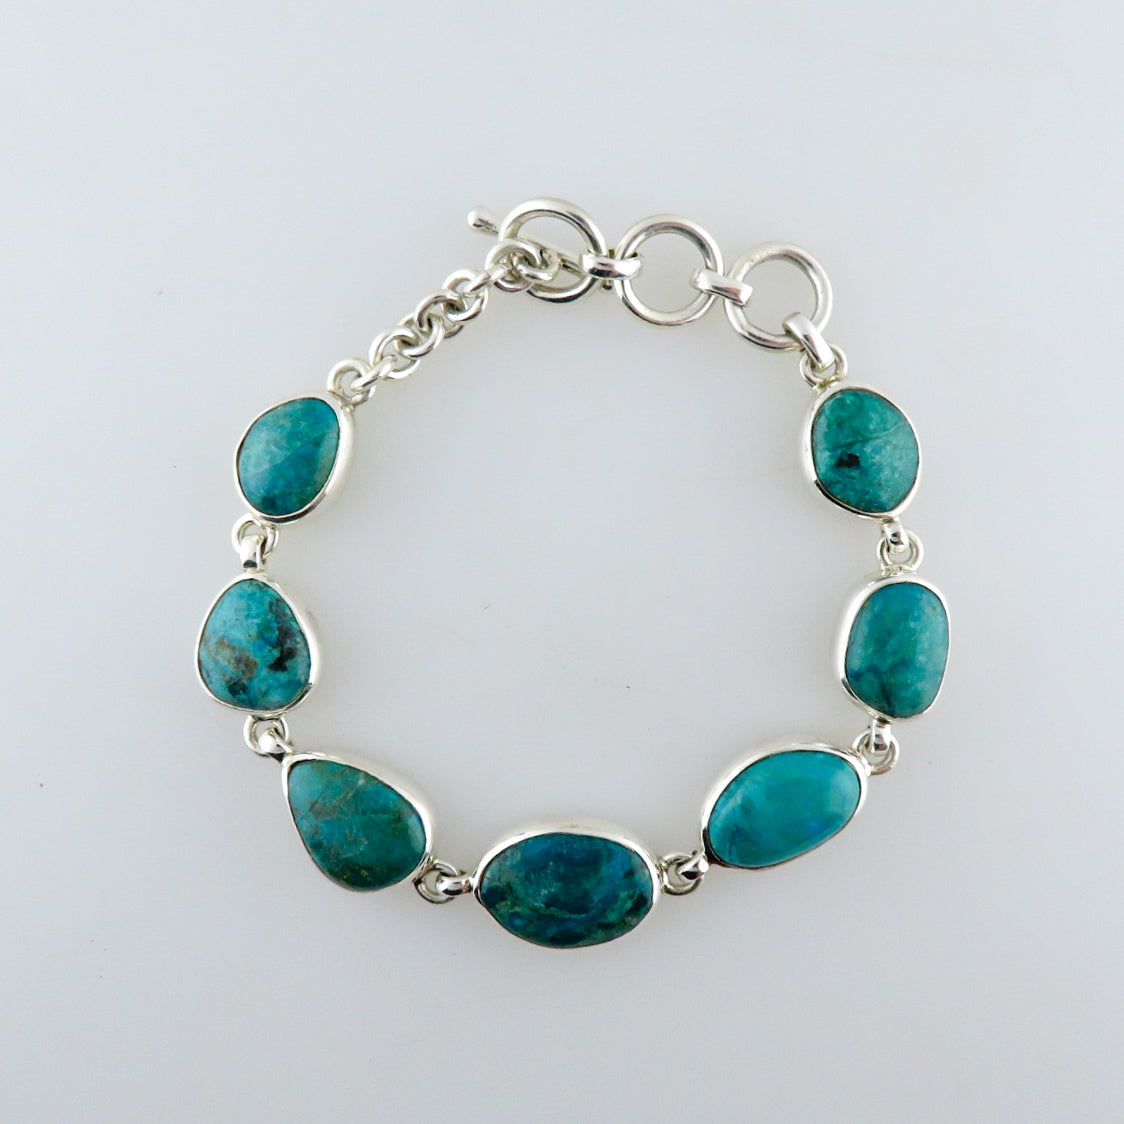 Chrysocolla Bracelet with Sterling Silver